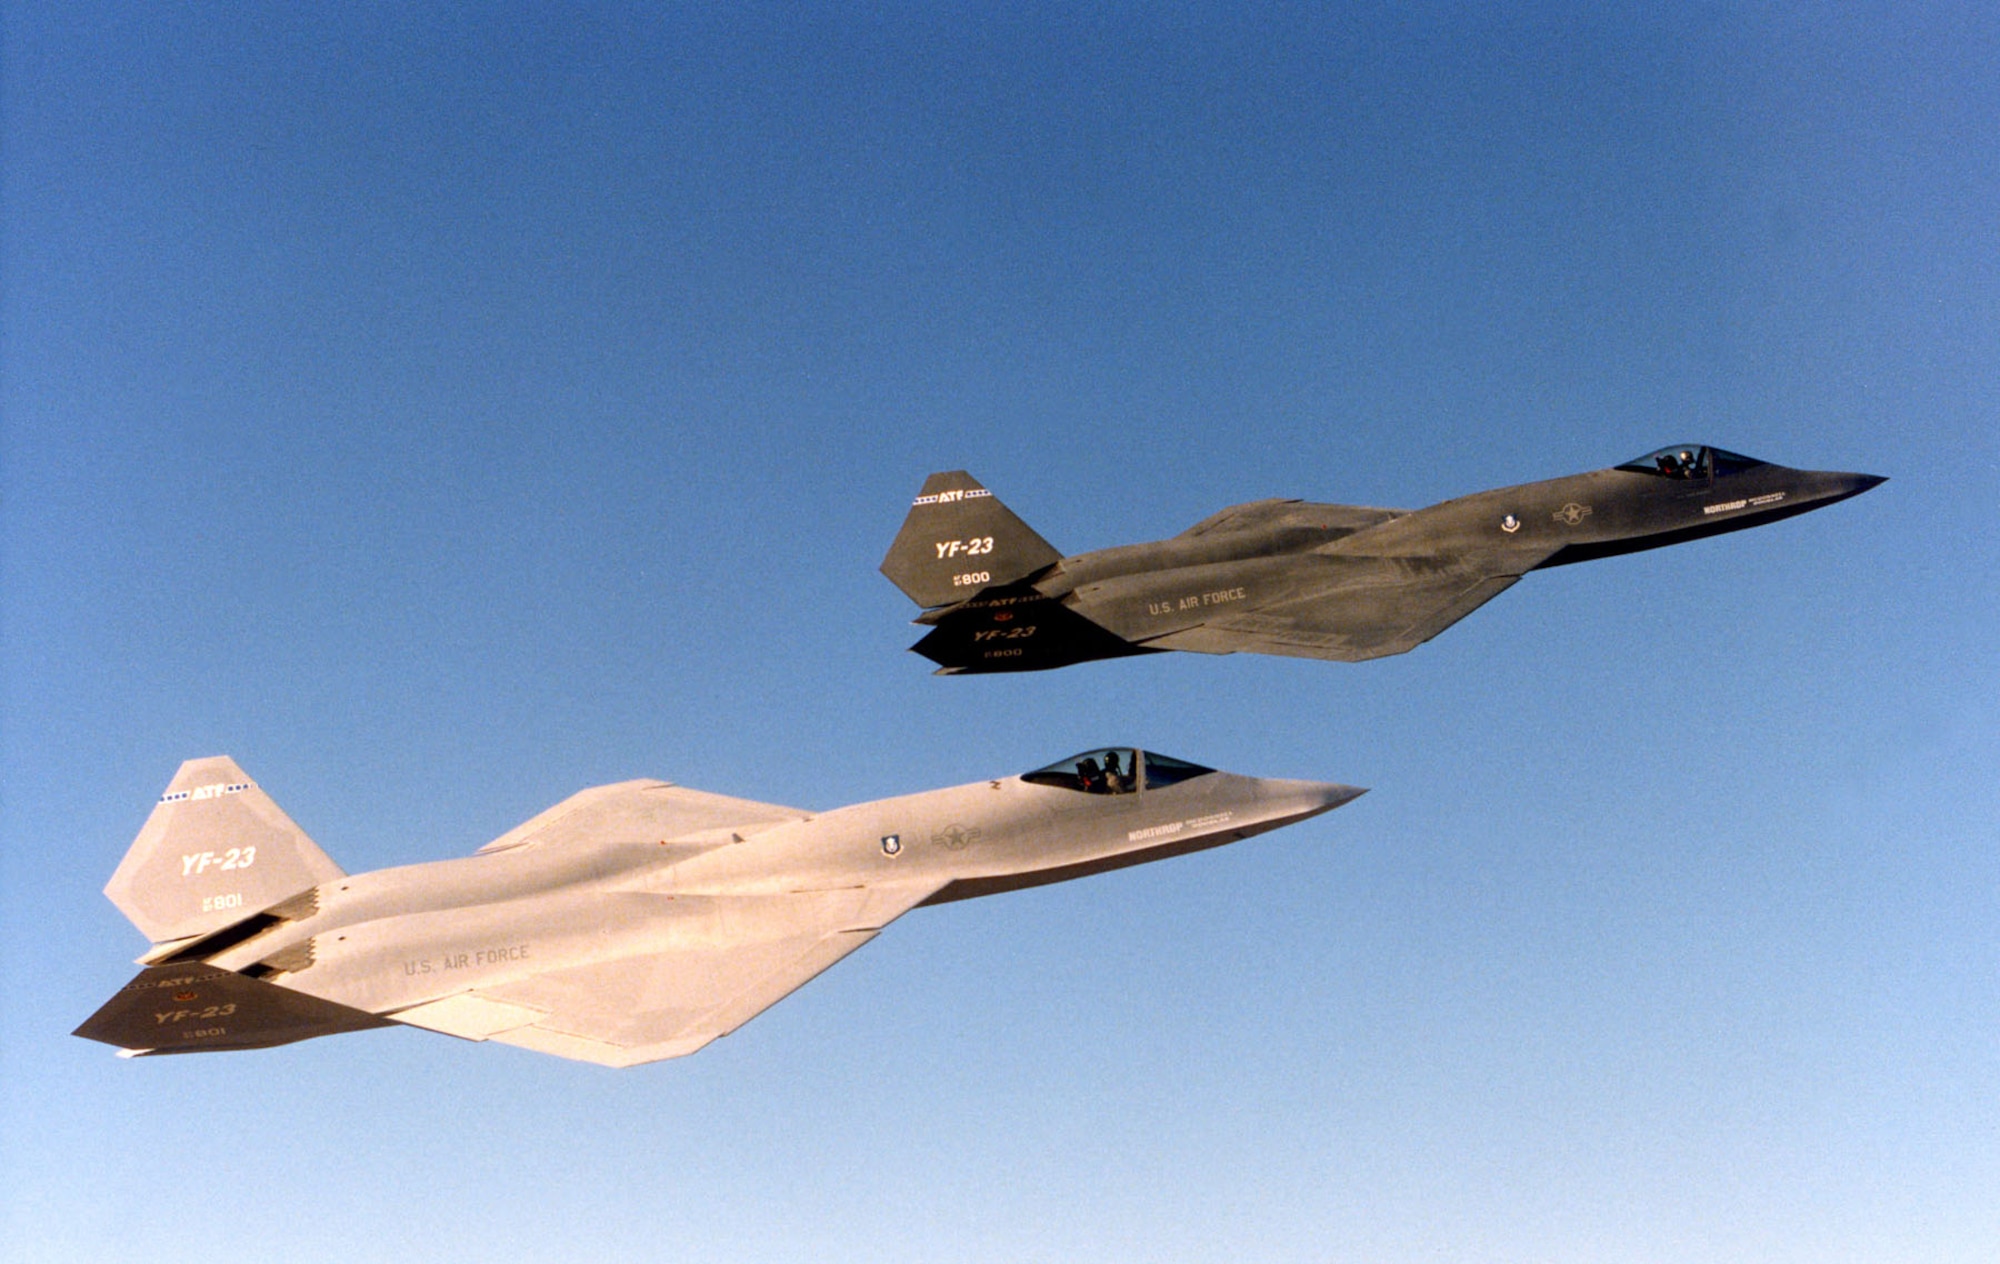 The two Northrop-McDonnell Douglas YF-23 prototypes in flight. The aircraft on display at the National Museum of the United States Air Force is the darker one on the right. (U.S. Air Force photo)